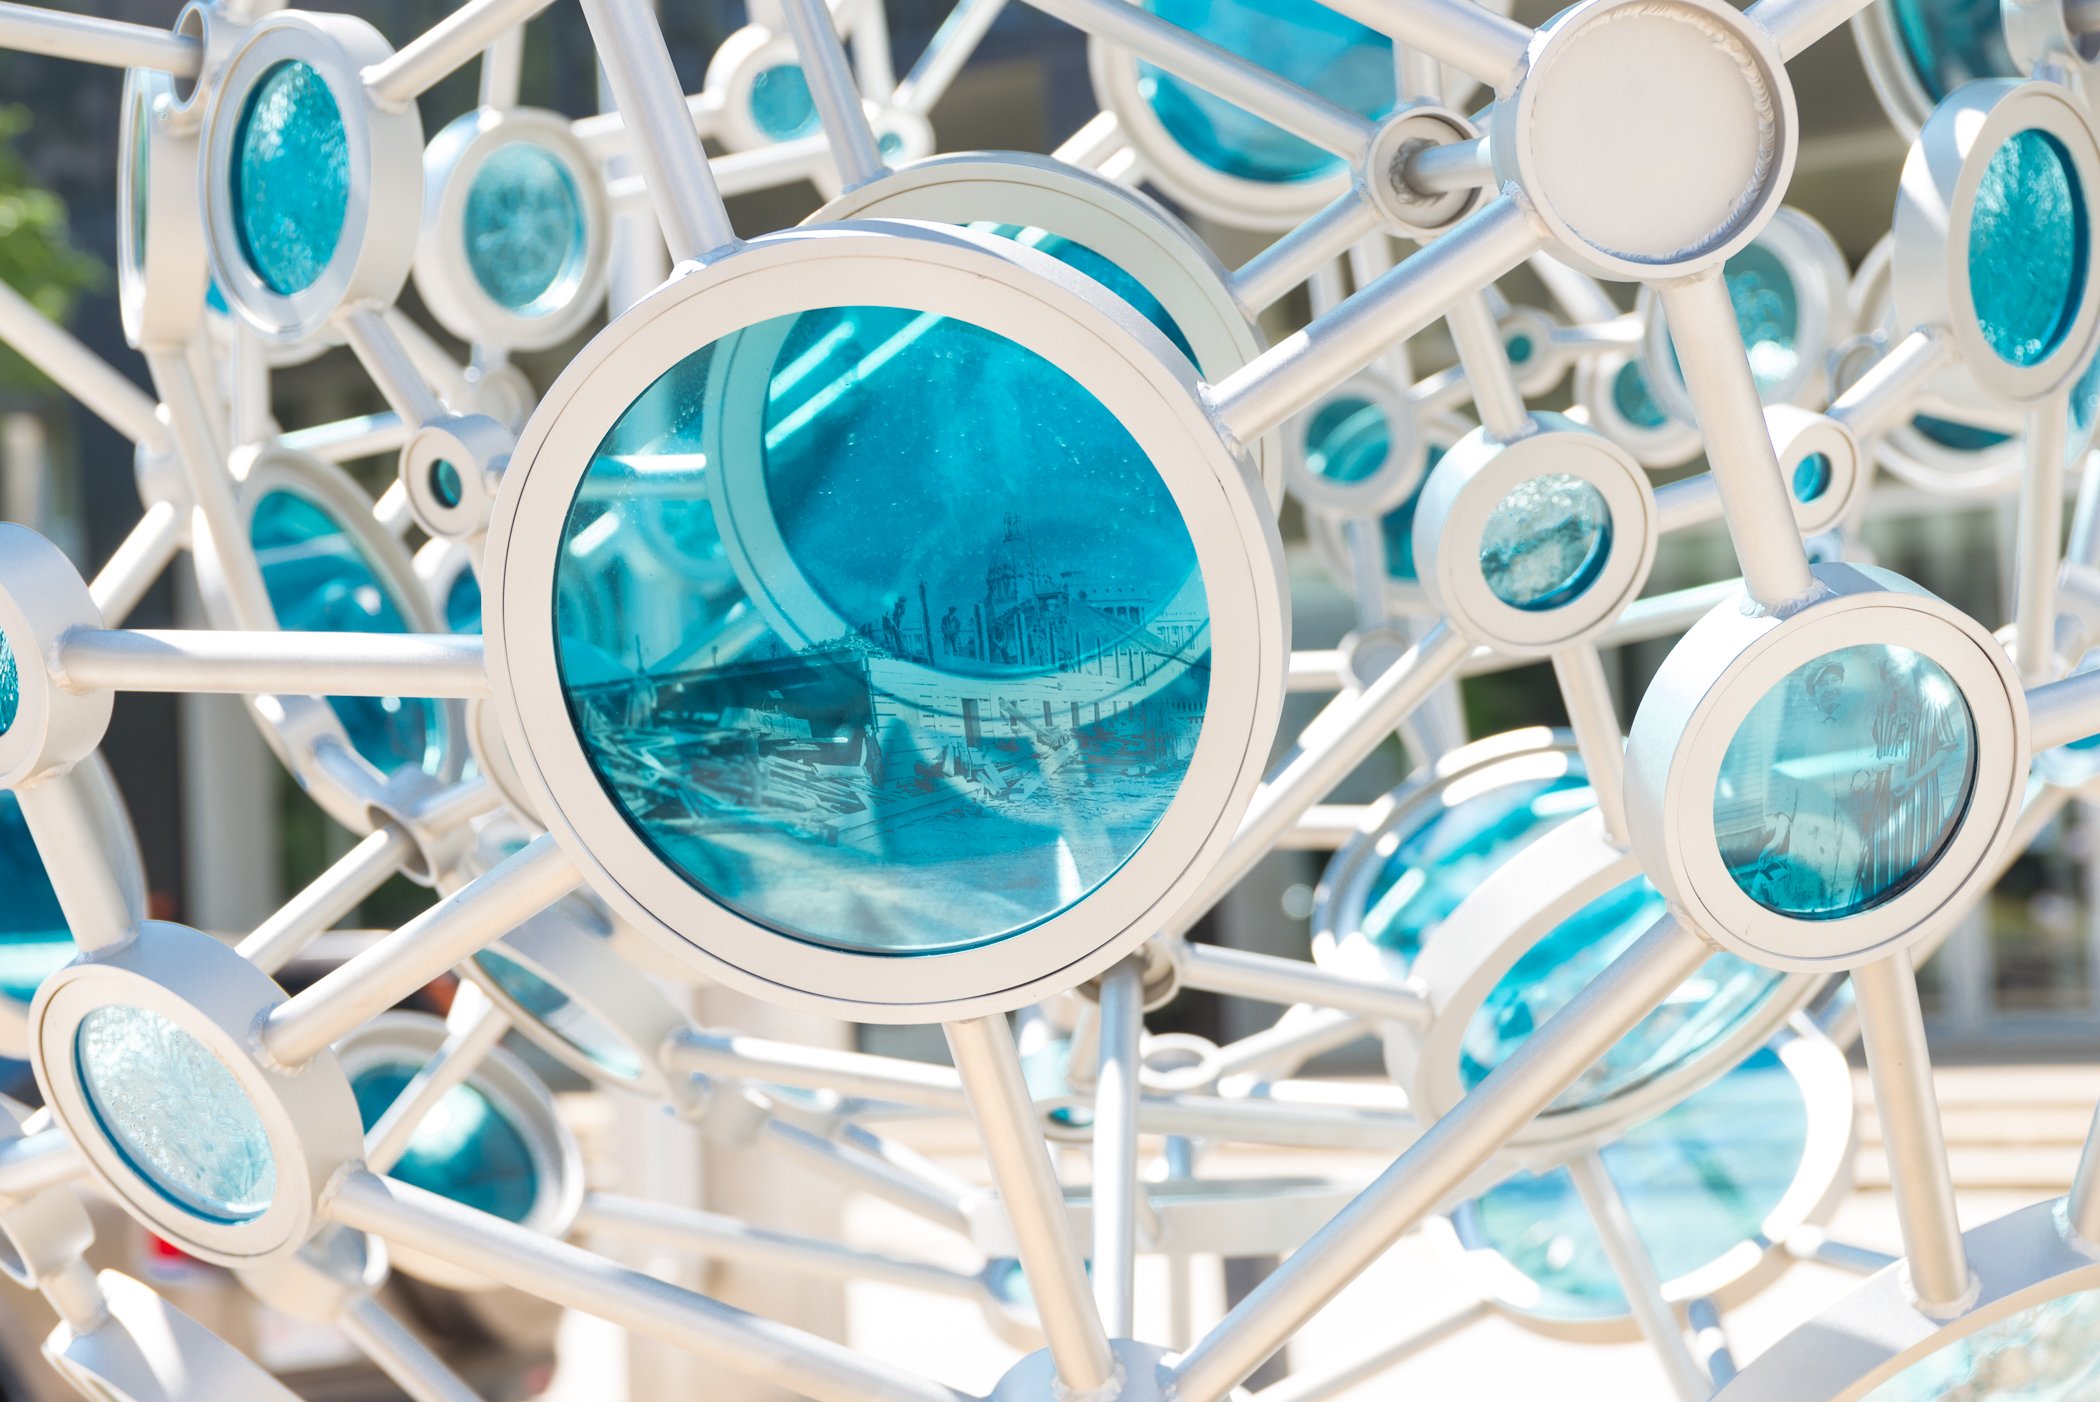   Tyler Rock and Julia Reimer ,  Transect (detail) , 2017. Stainless steel, Laminated Glass, Cast Glass, window portal 30 cm diameter. Photo: Charles Boulet. 